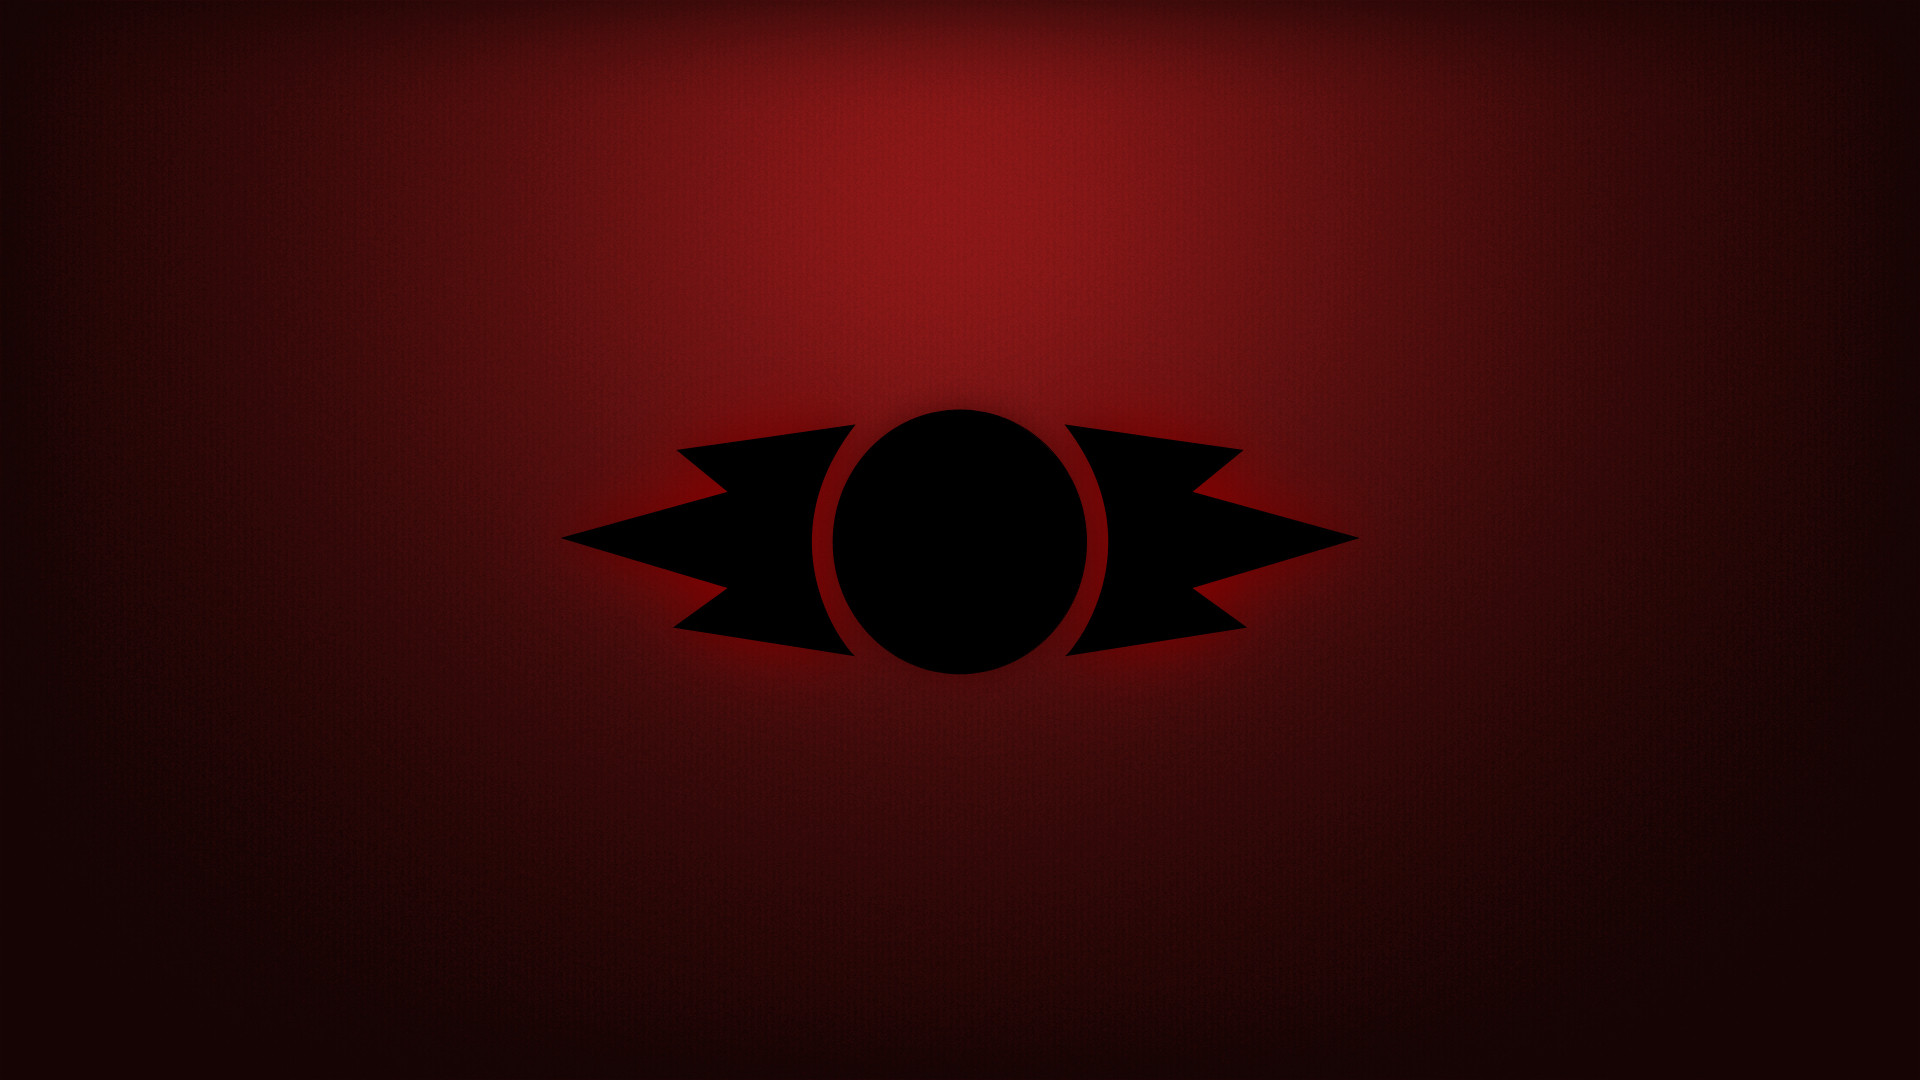 wallpaper you guys might like The Jedi Order emblem Ill do a Sith 1920x1080